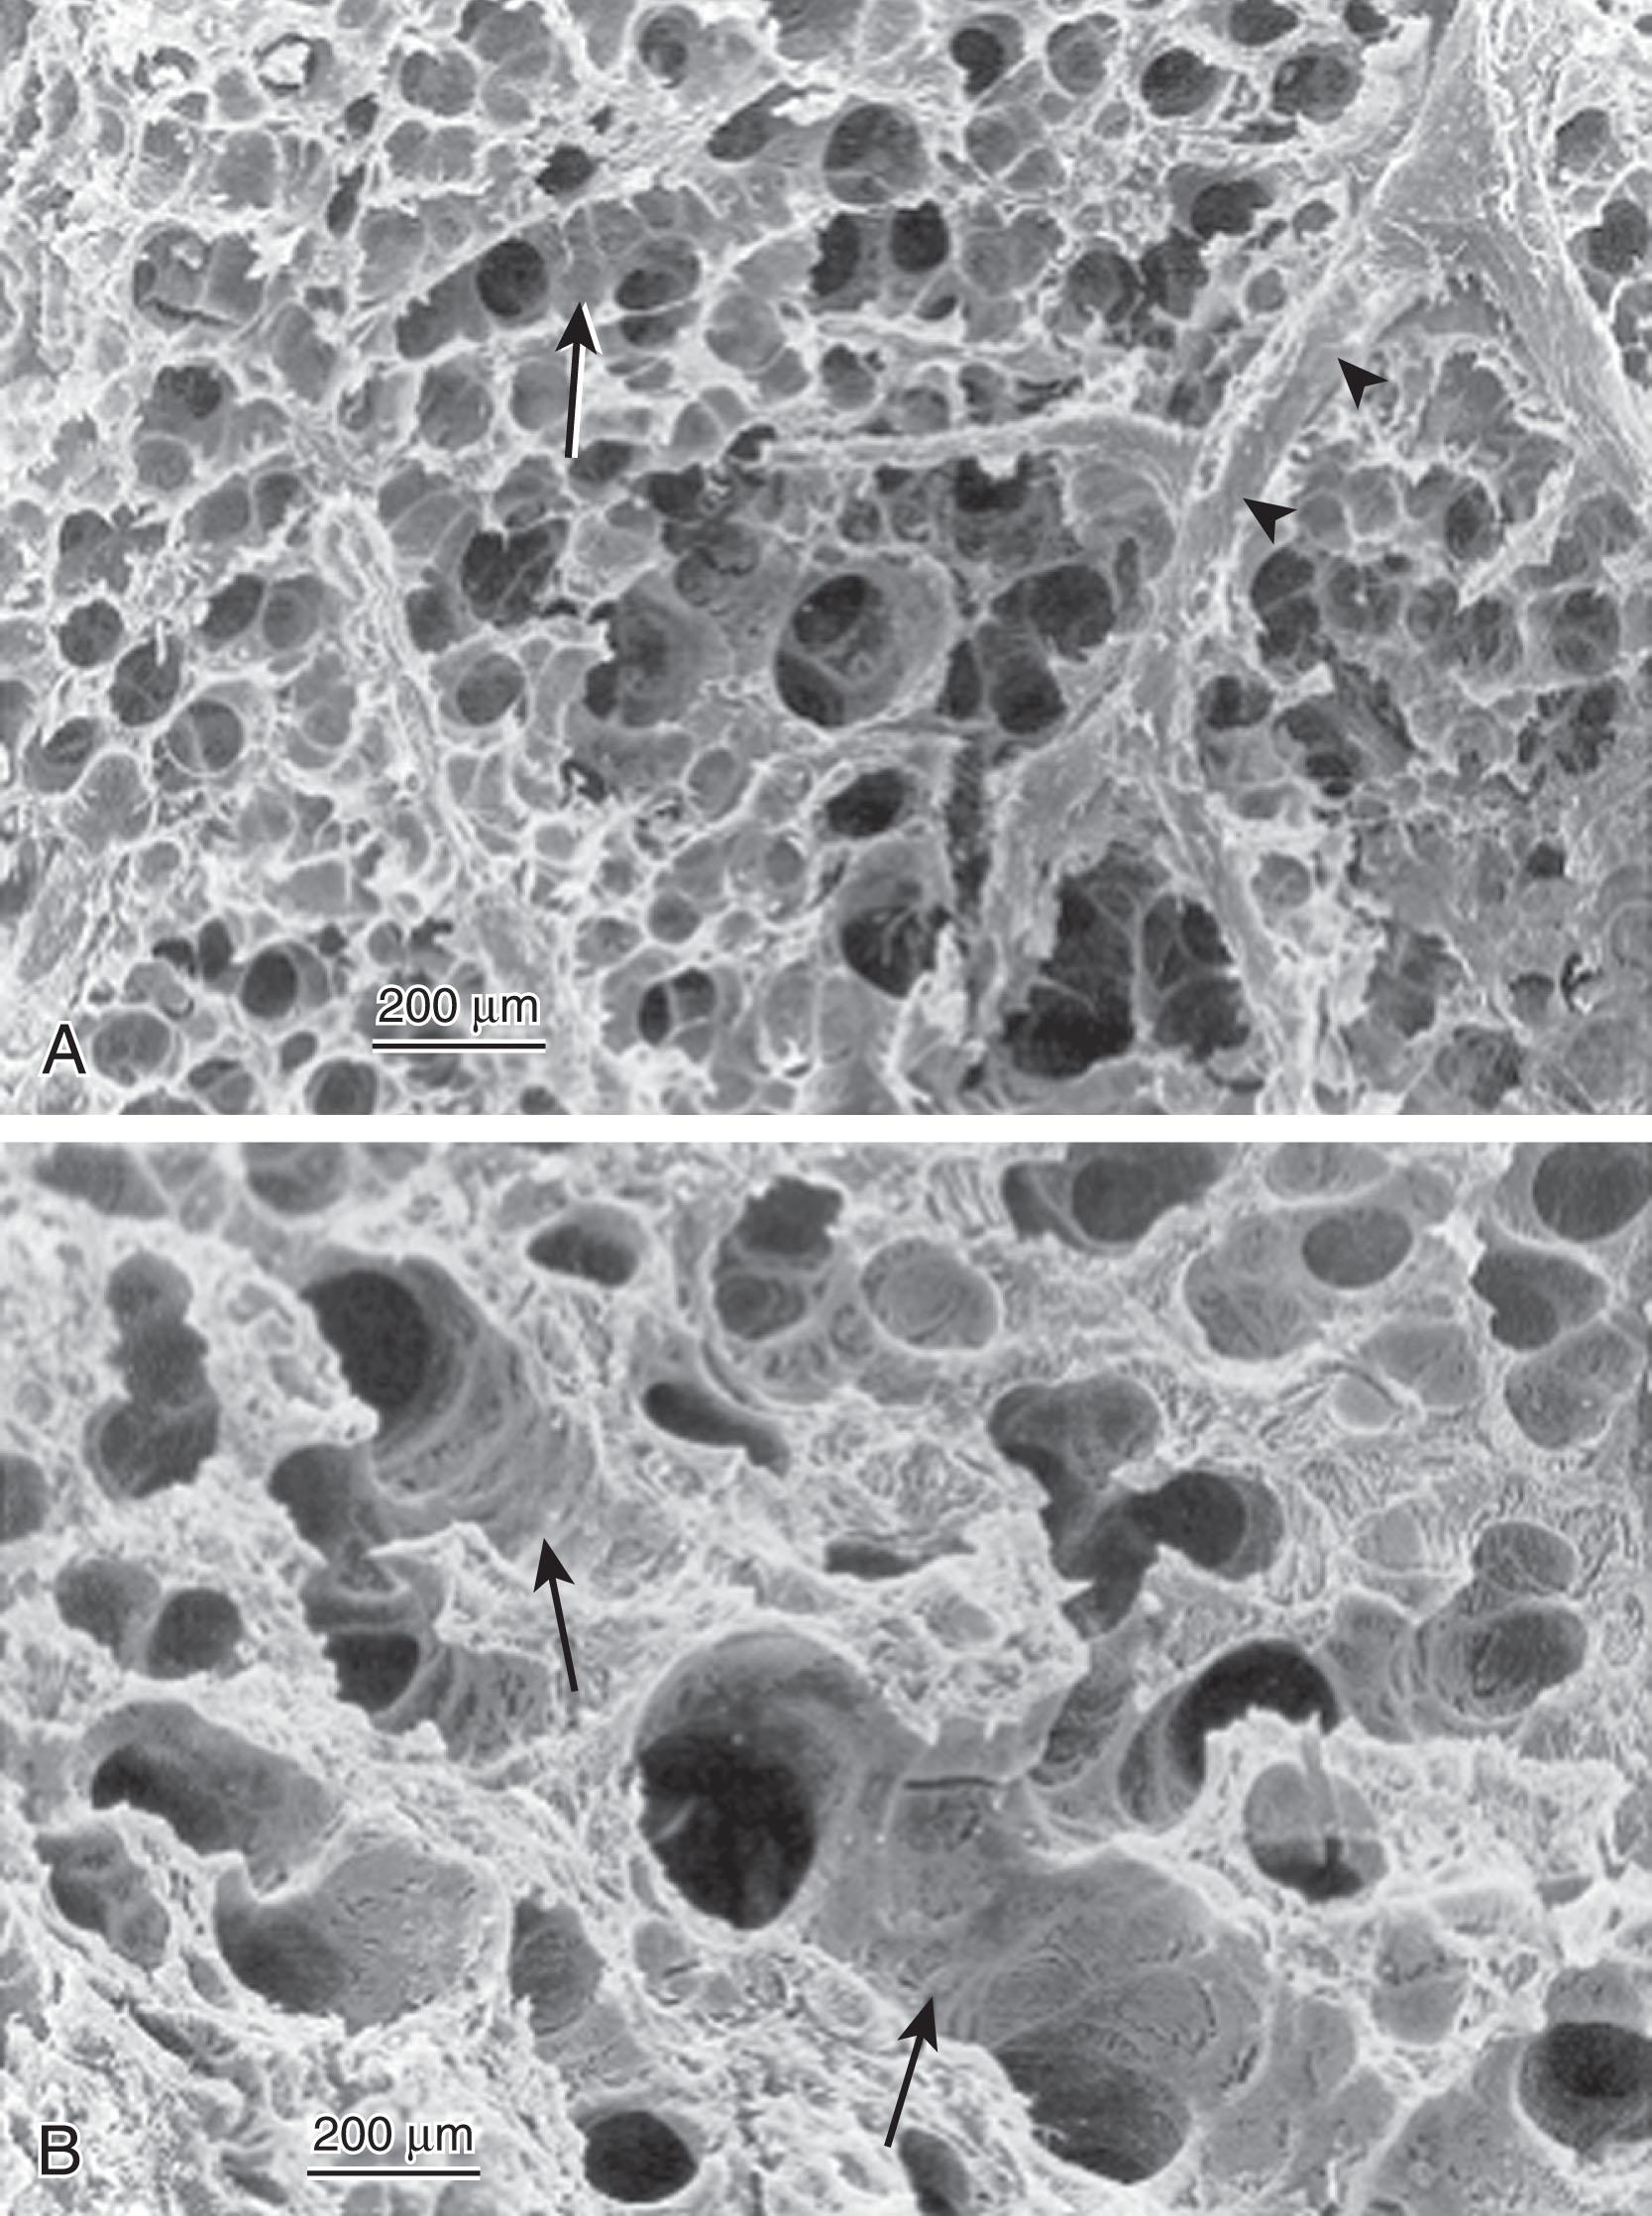 Fig. 42.6, Histology of Respiratory Distress Syndrome. Scanning electron micrograph of lung frozen during inflation with air in a healthy premature monkey (A) compared with one with respiratory distress syndrome (B). Lungs affected by respiratory distress syndrome have collapsed alveoli full of liquid and proteinaceous debris, with overdistended terminal airways.